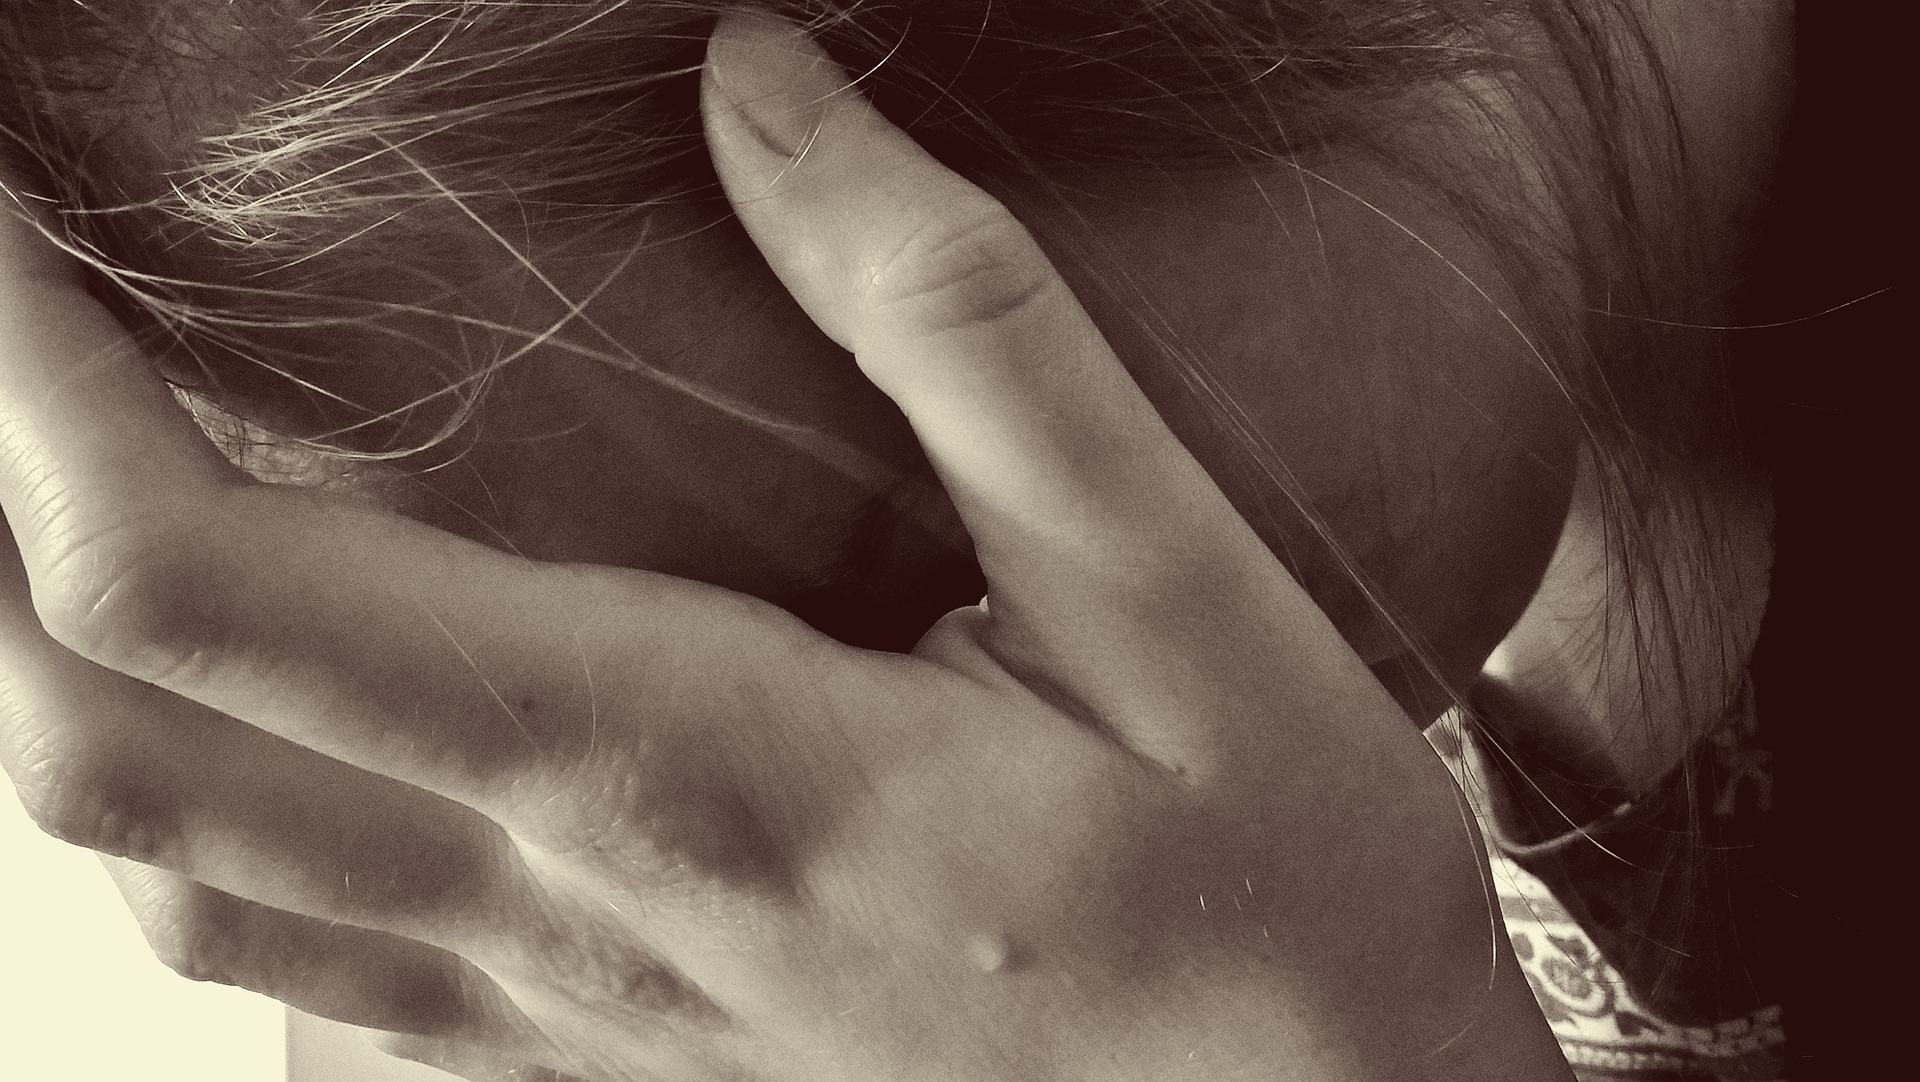 TEACHERS AND SUPPORT STAFF LACK TRAINING TO TACKLE “TABOO” OF SELF-HARM IN SCHOOLS